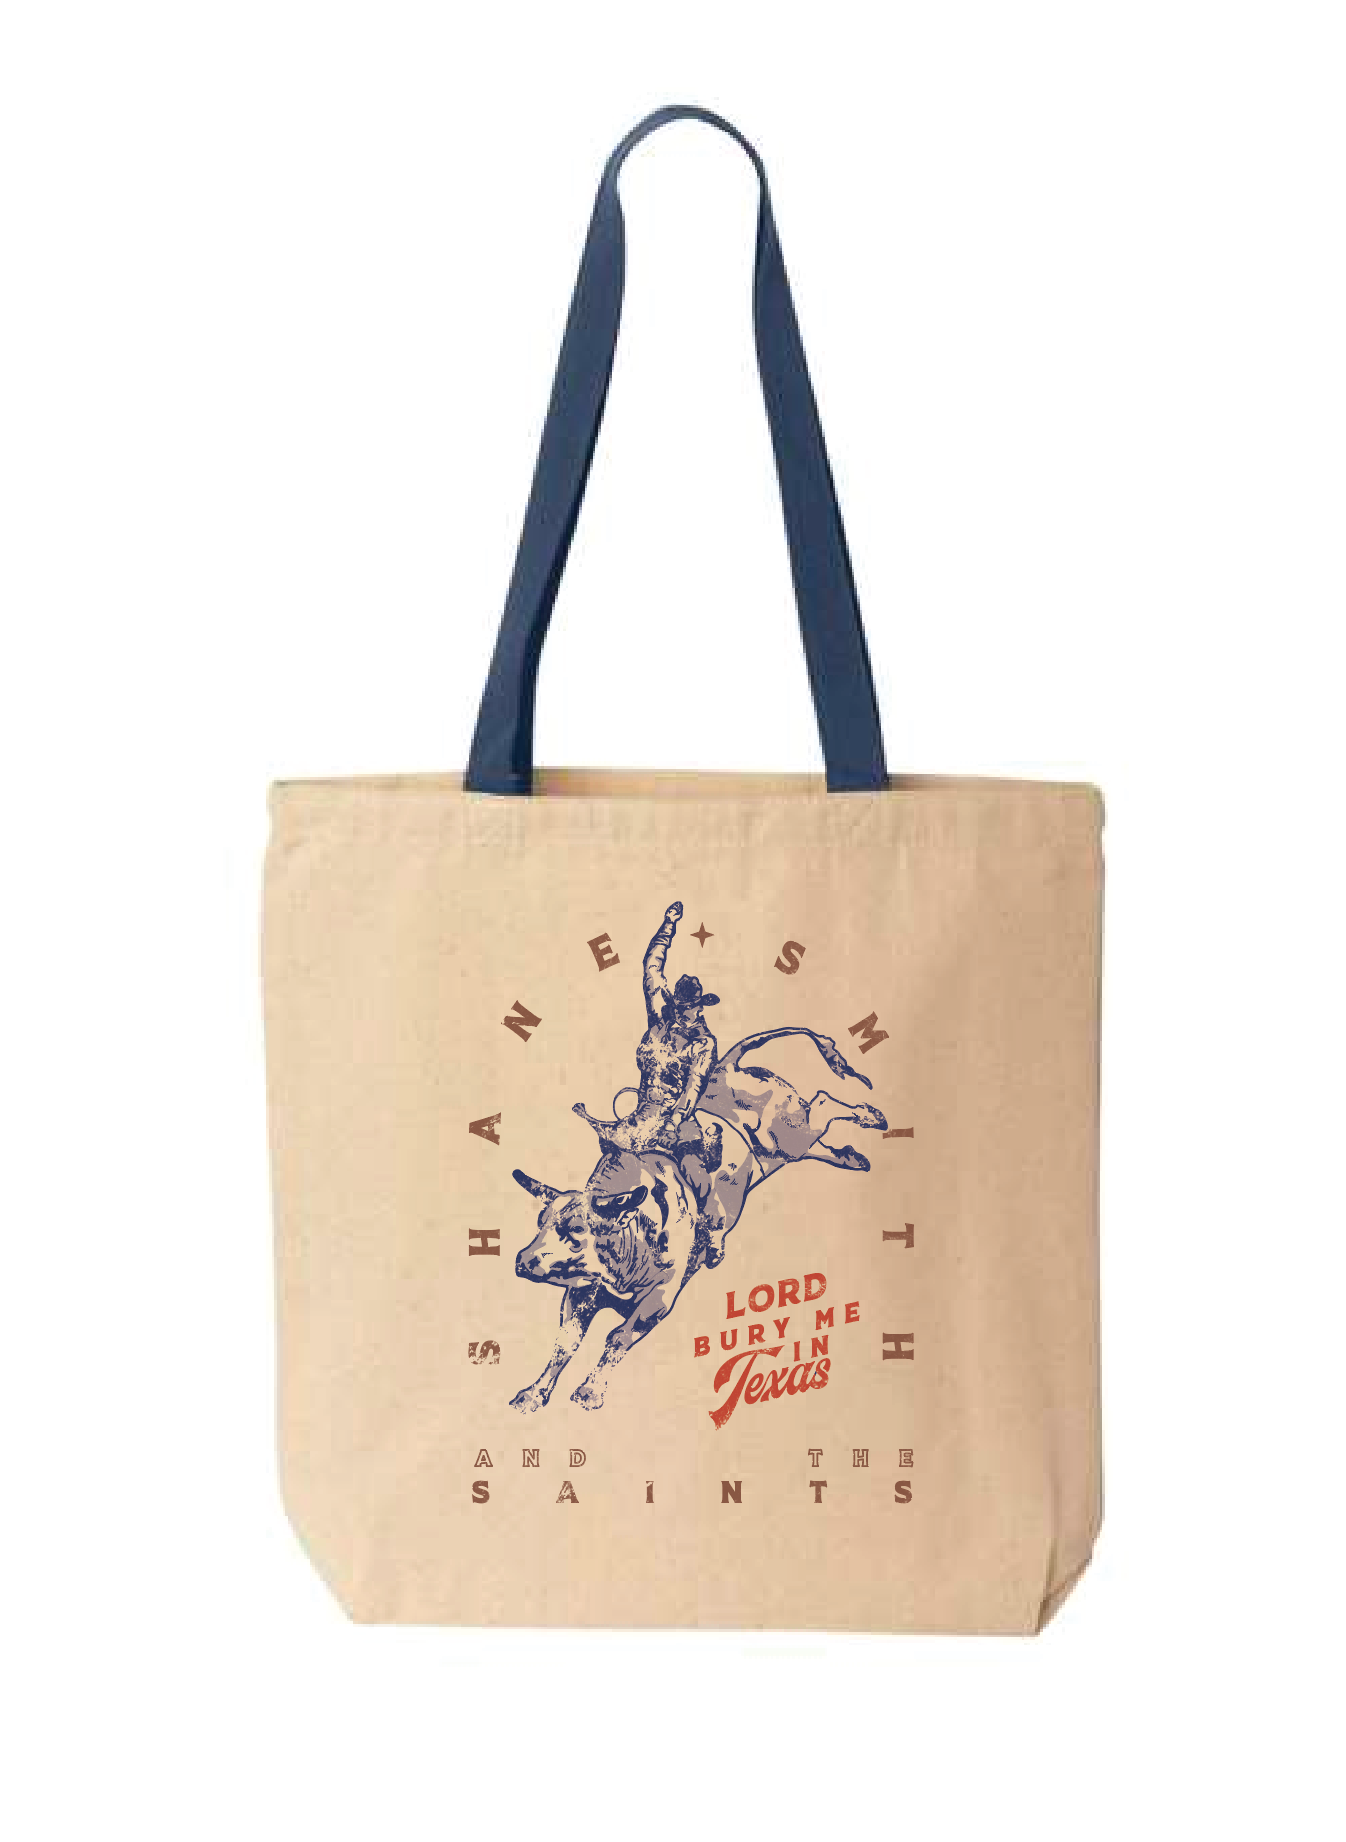 Shane Smith Tote Bags - 2 styles